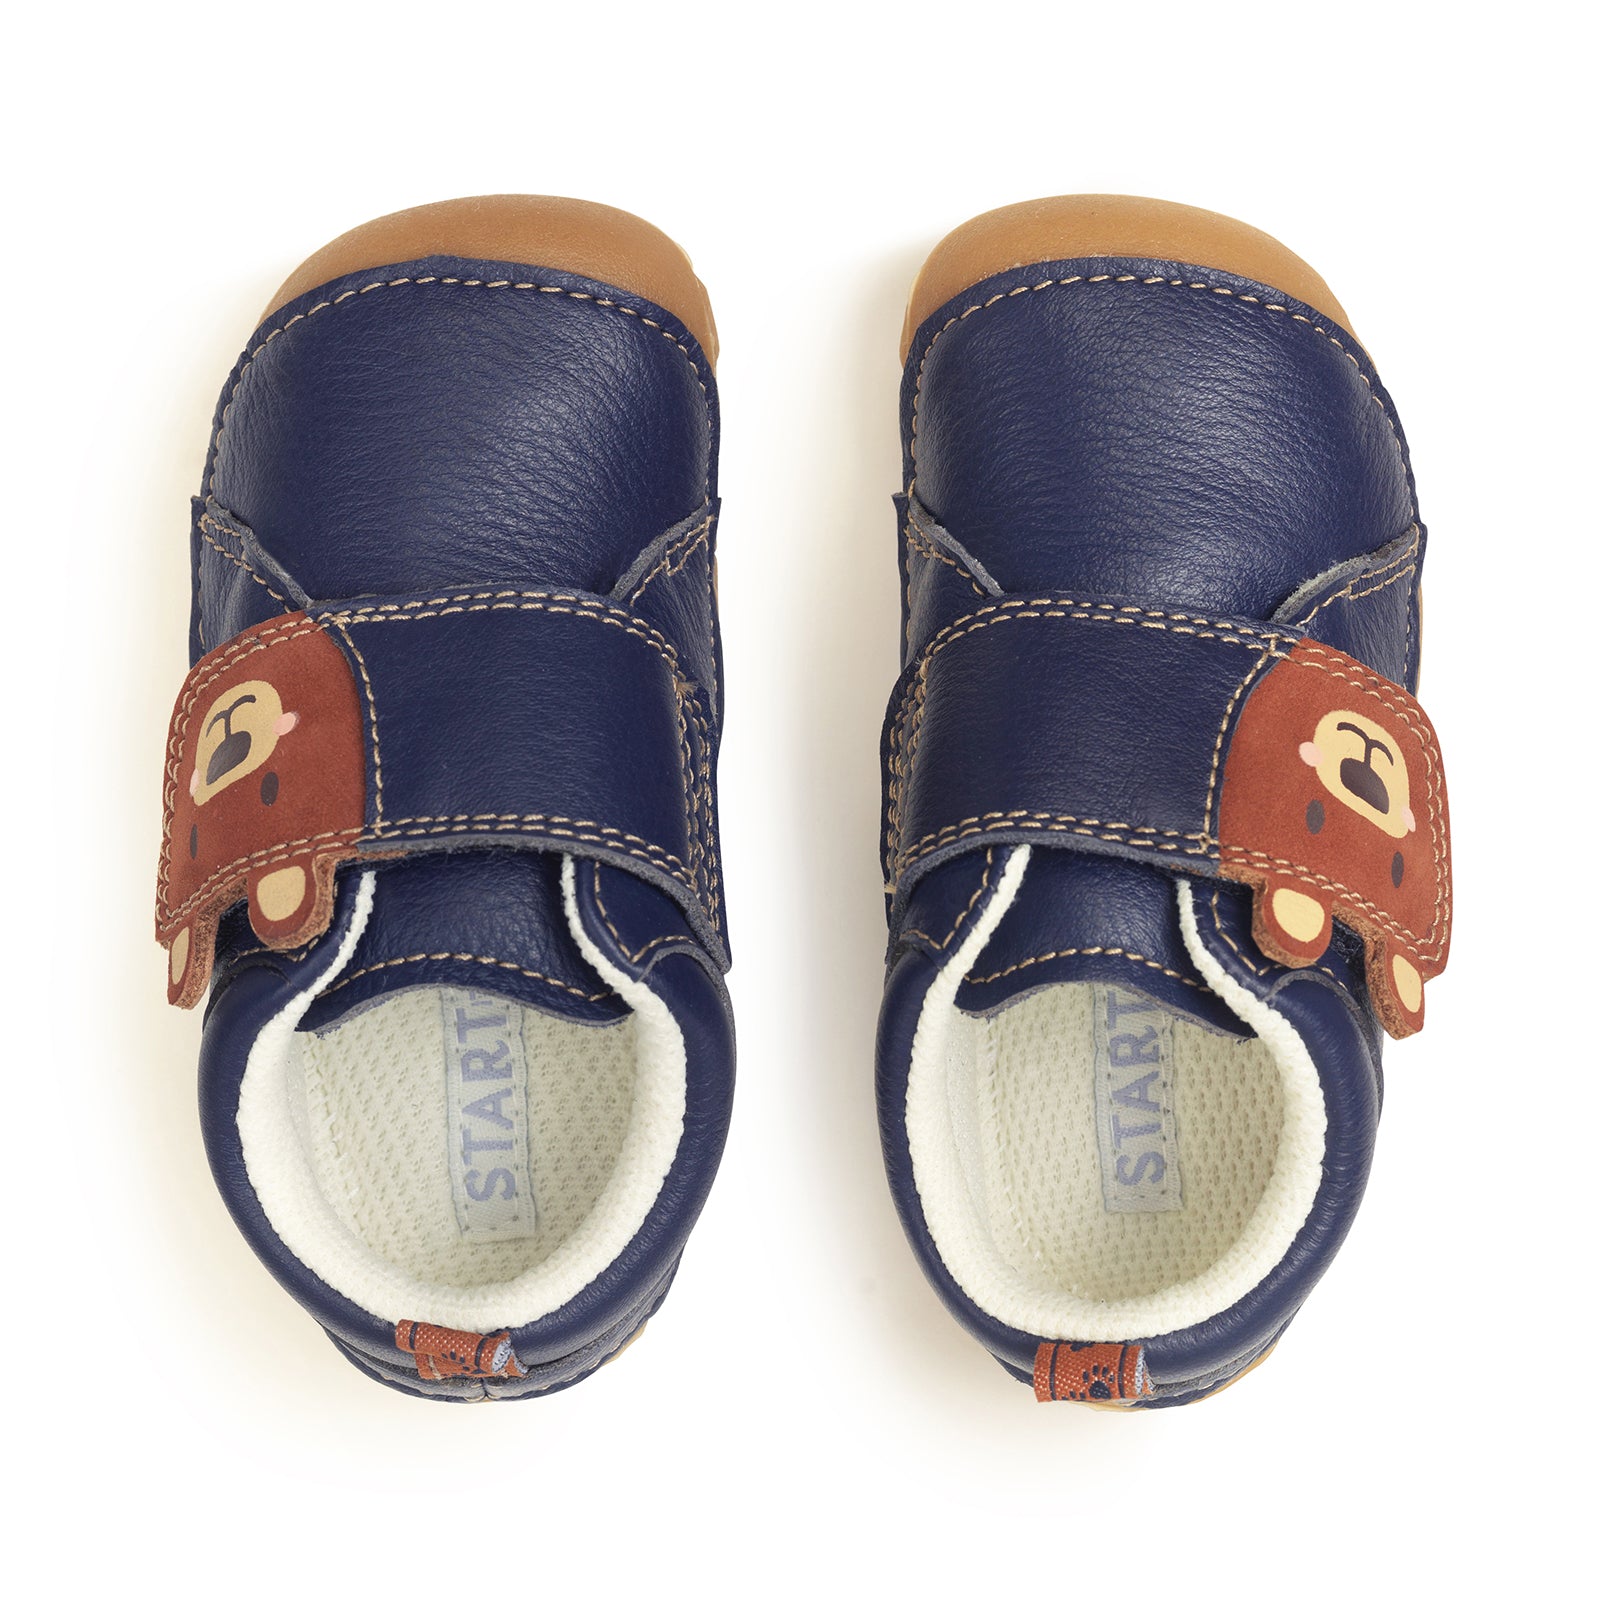 A pair ofnboy's pre-walkers by Start Rite, style Bear Hug,in navy leather with brown paw print detail to side and brown bears face on velcro fastening. Toe bumper. View from above.